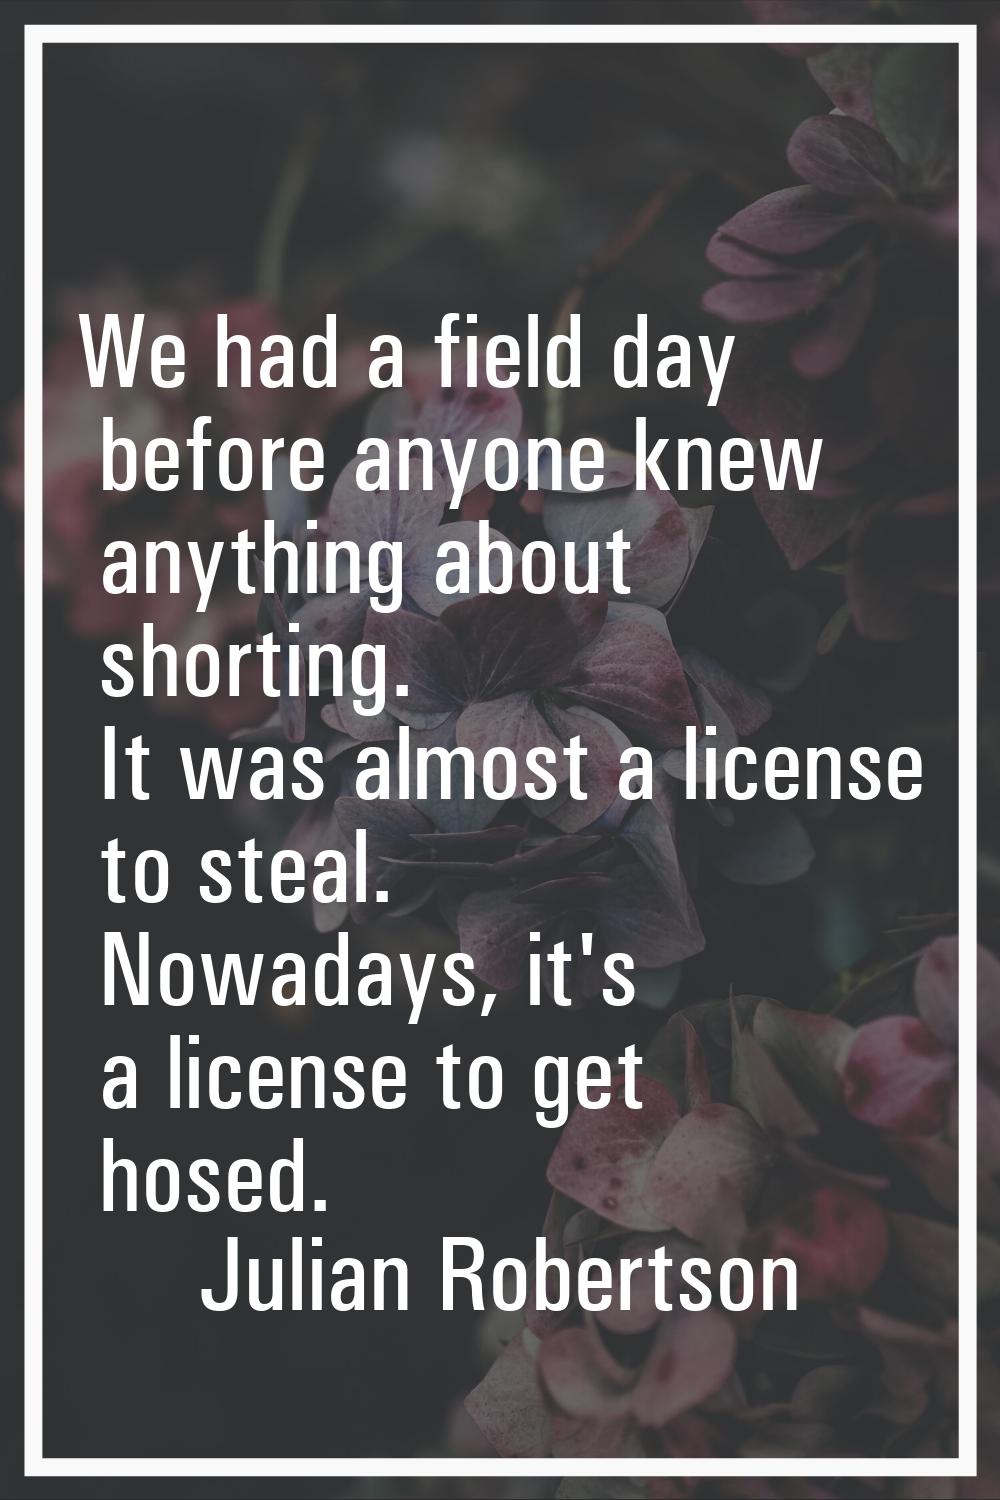 We had a field day before anyone knew anything about shorting. It was almost a license to steal. No